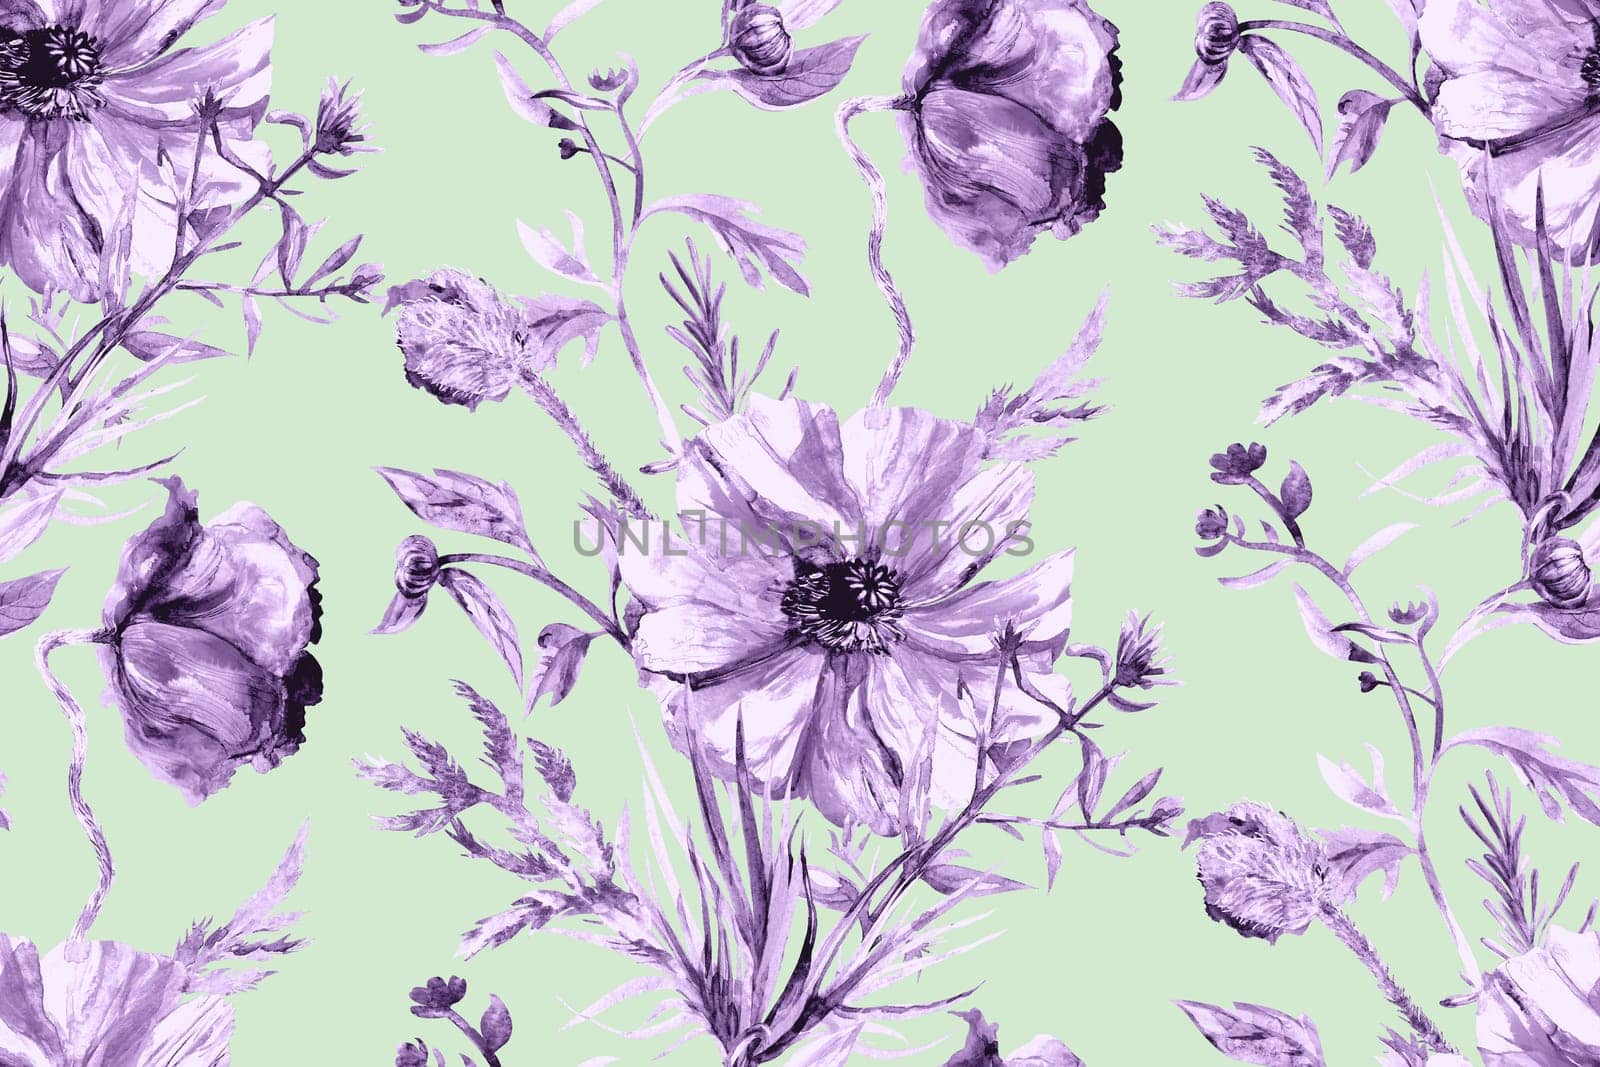 Seamless summer watercolor pattern with monochrome watercolor poppies in purple shades on a light green background for the design of textiles and surfaces